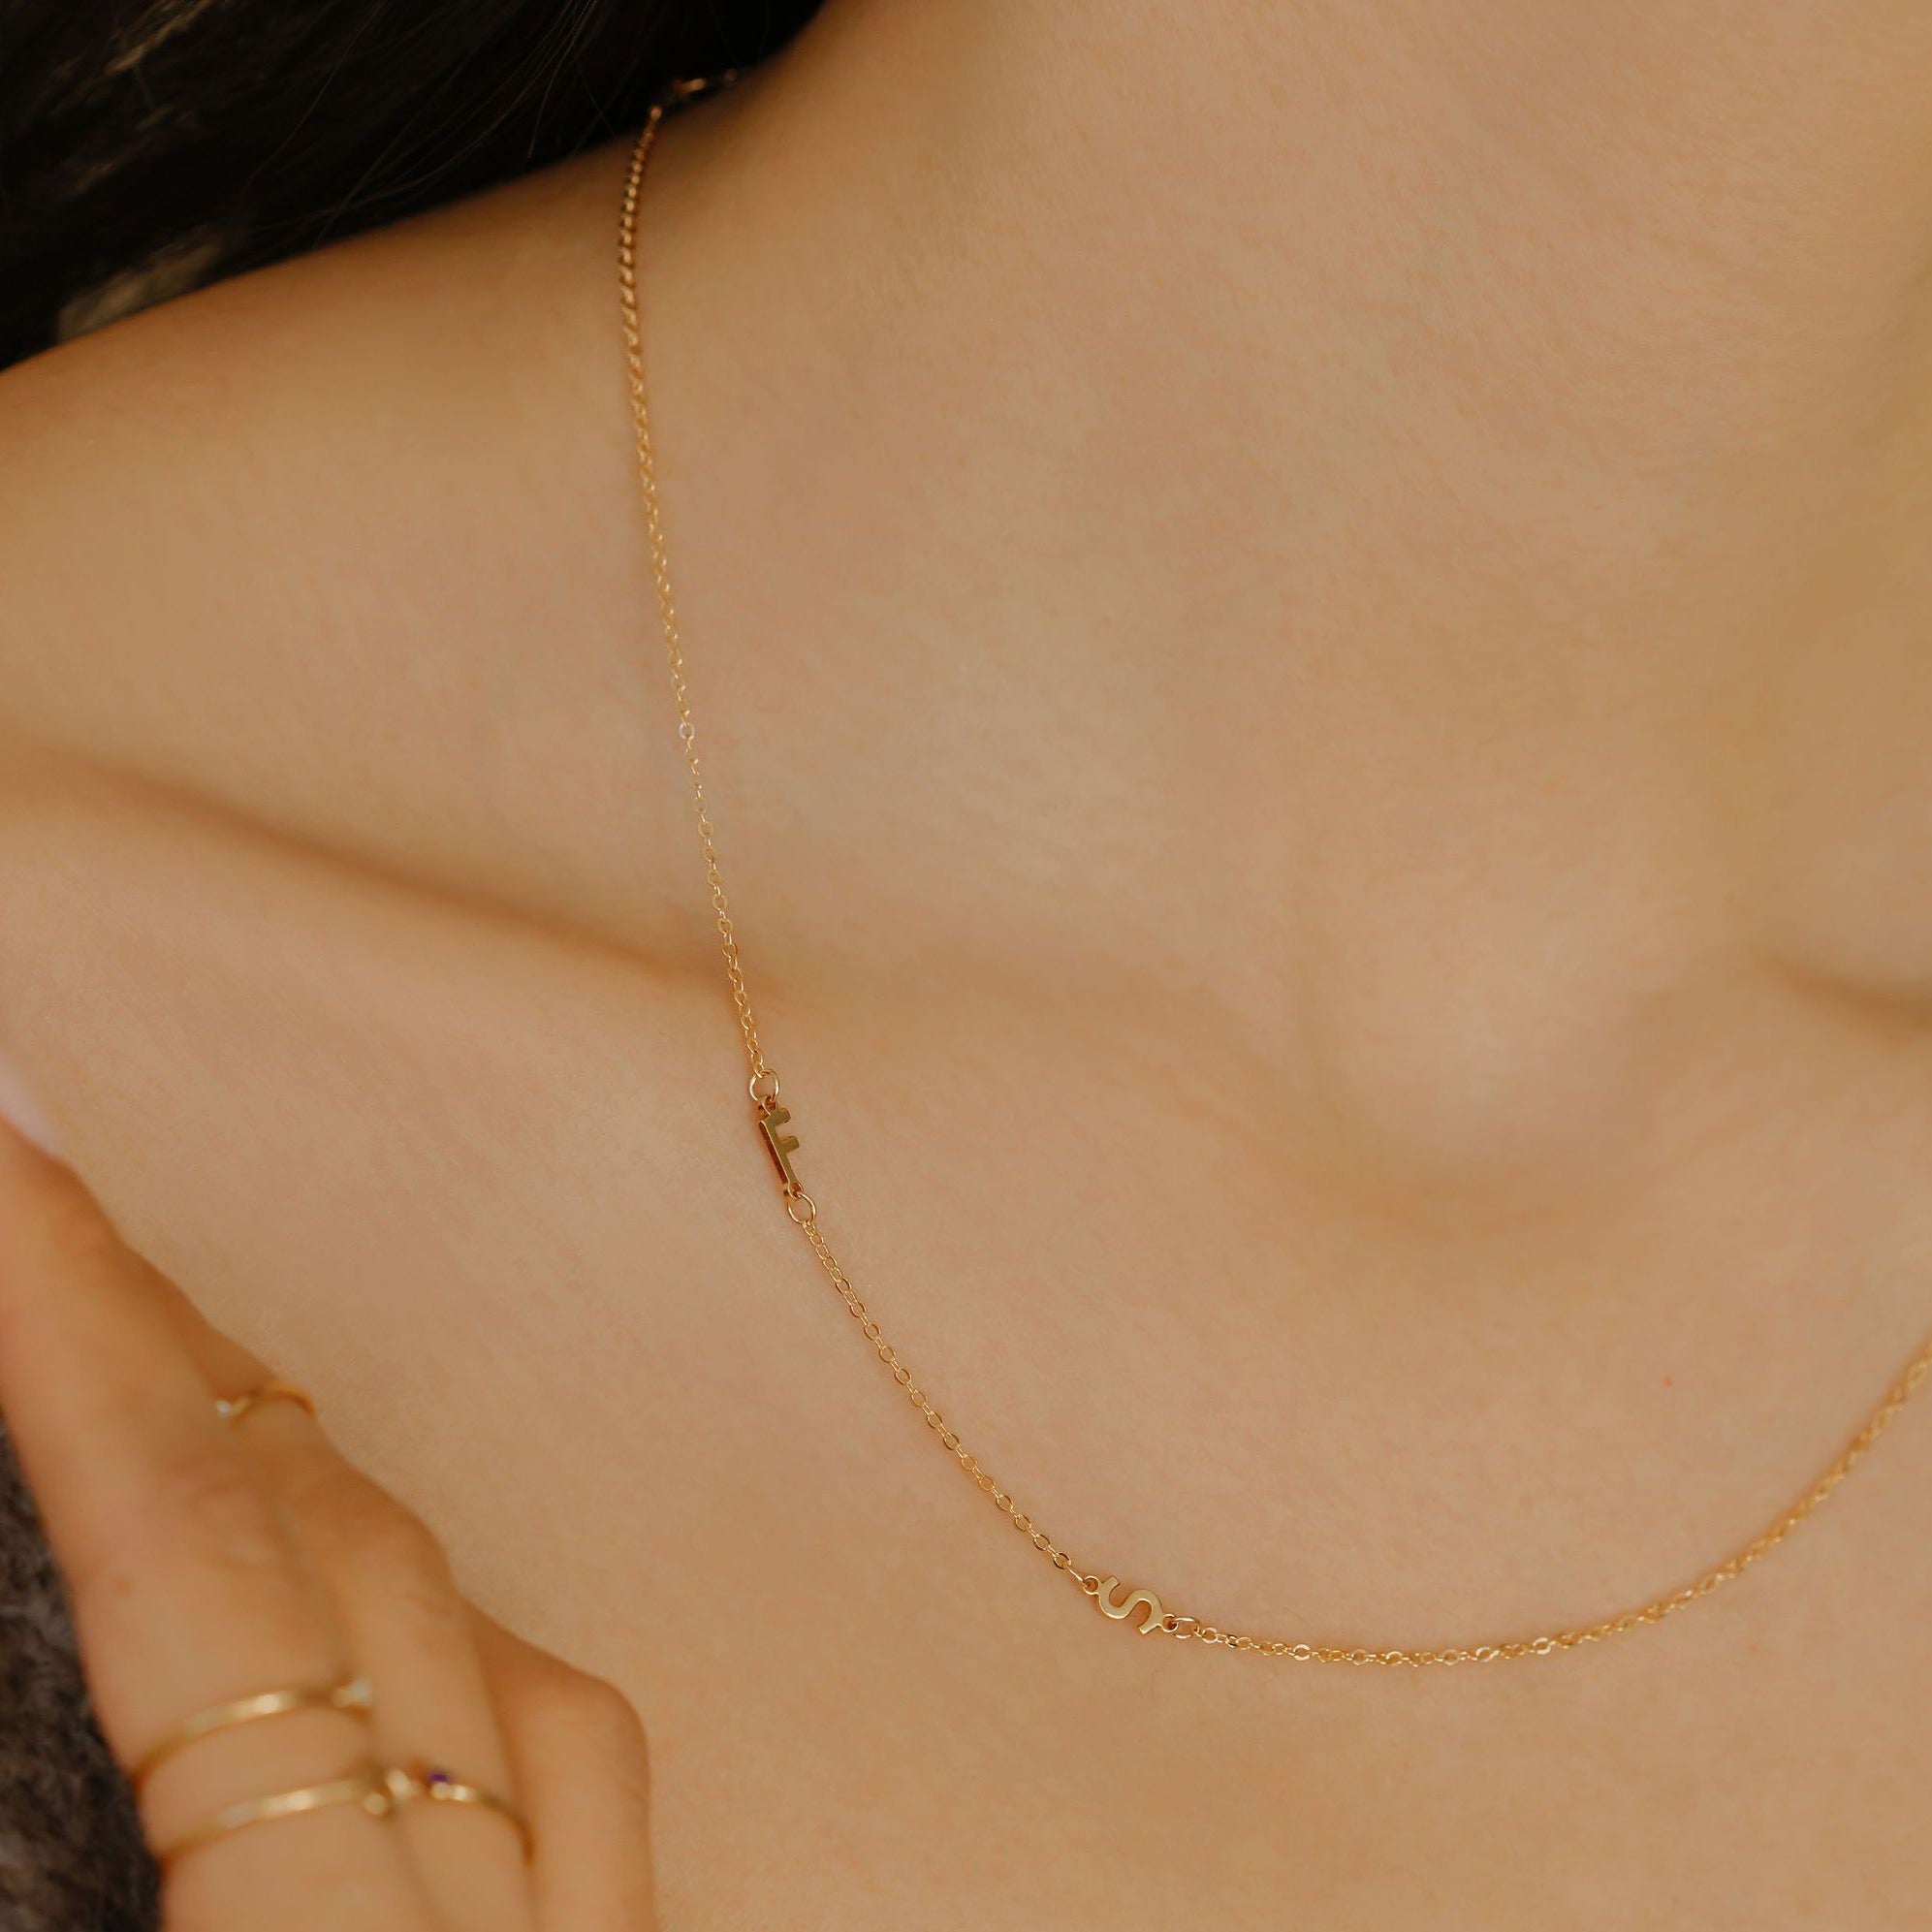 J Necklace / Gold Initial Necklace | Linjer Jewelry